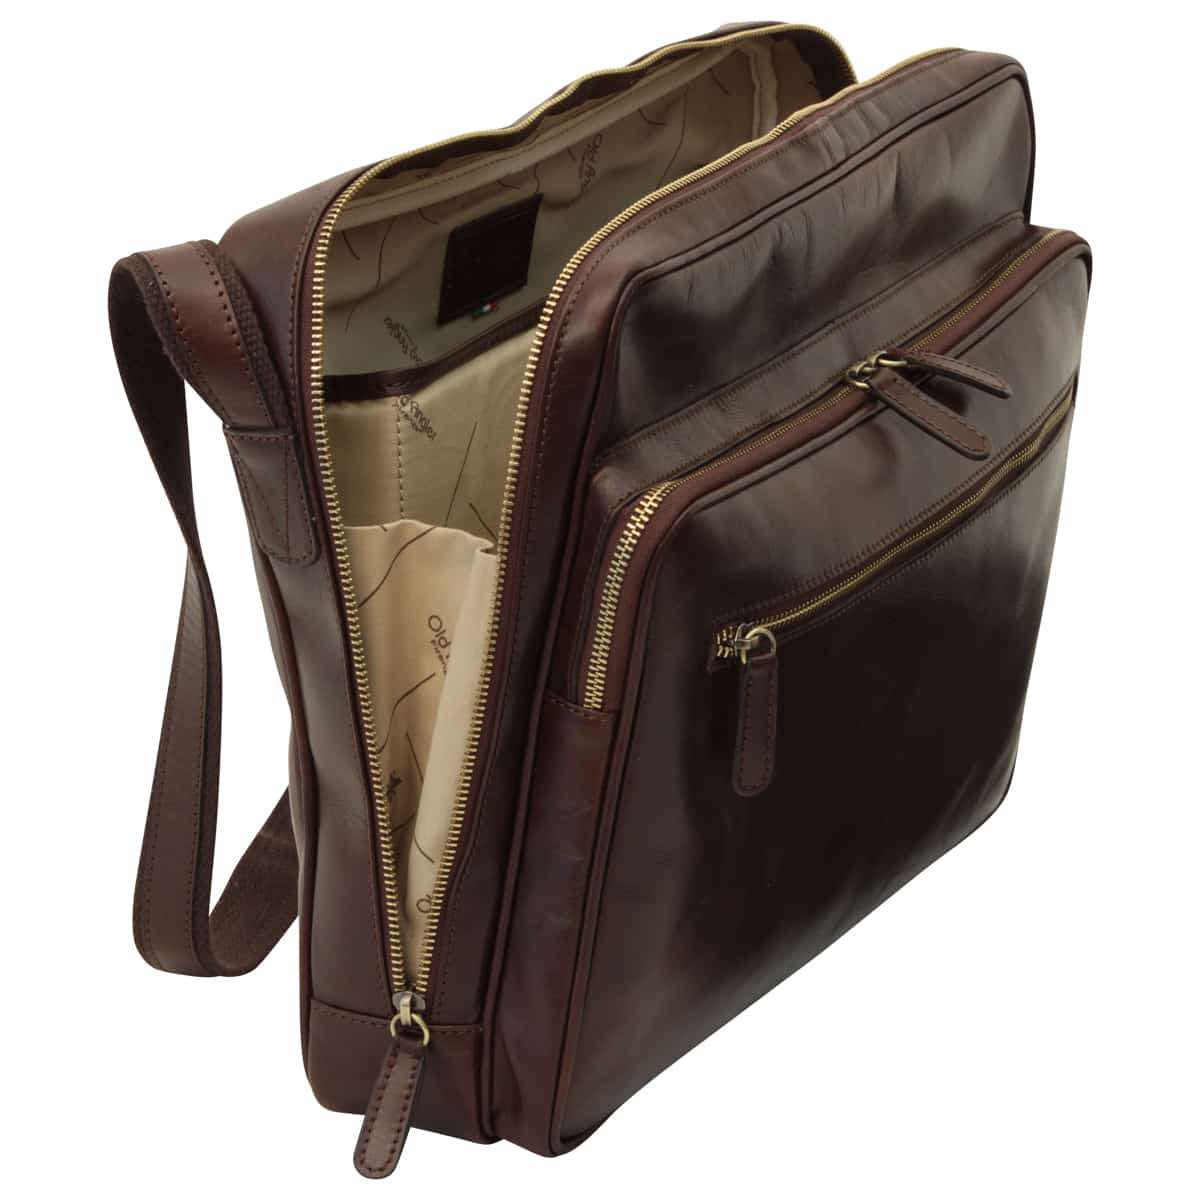 Large leather bag with zip closures - Dark Brown | 409289TM UK | Old Angler Firenze